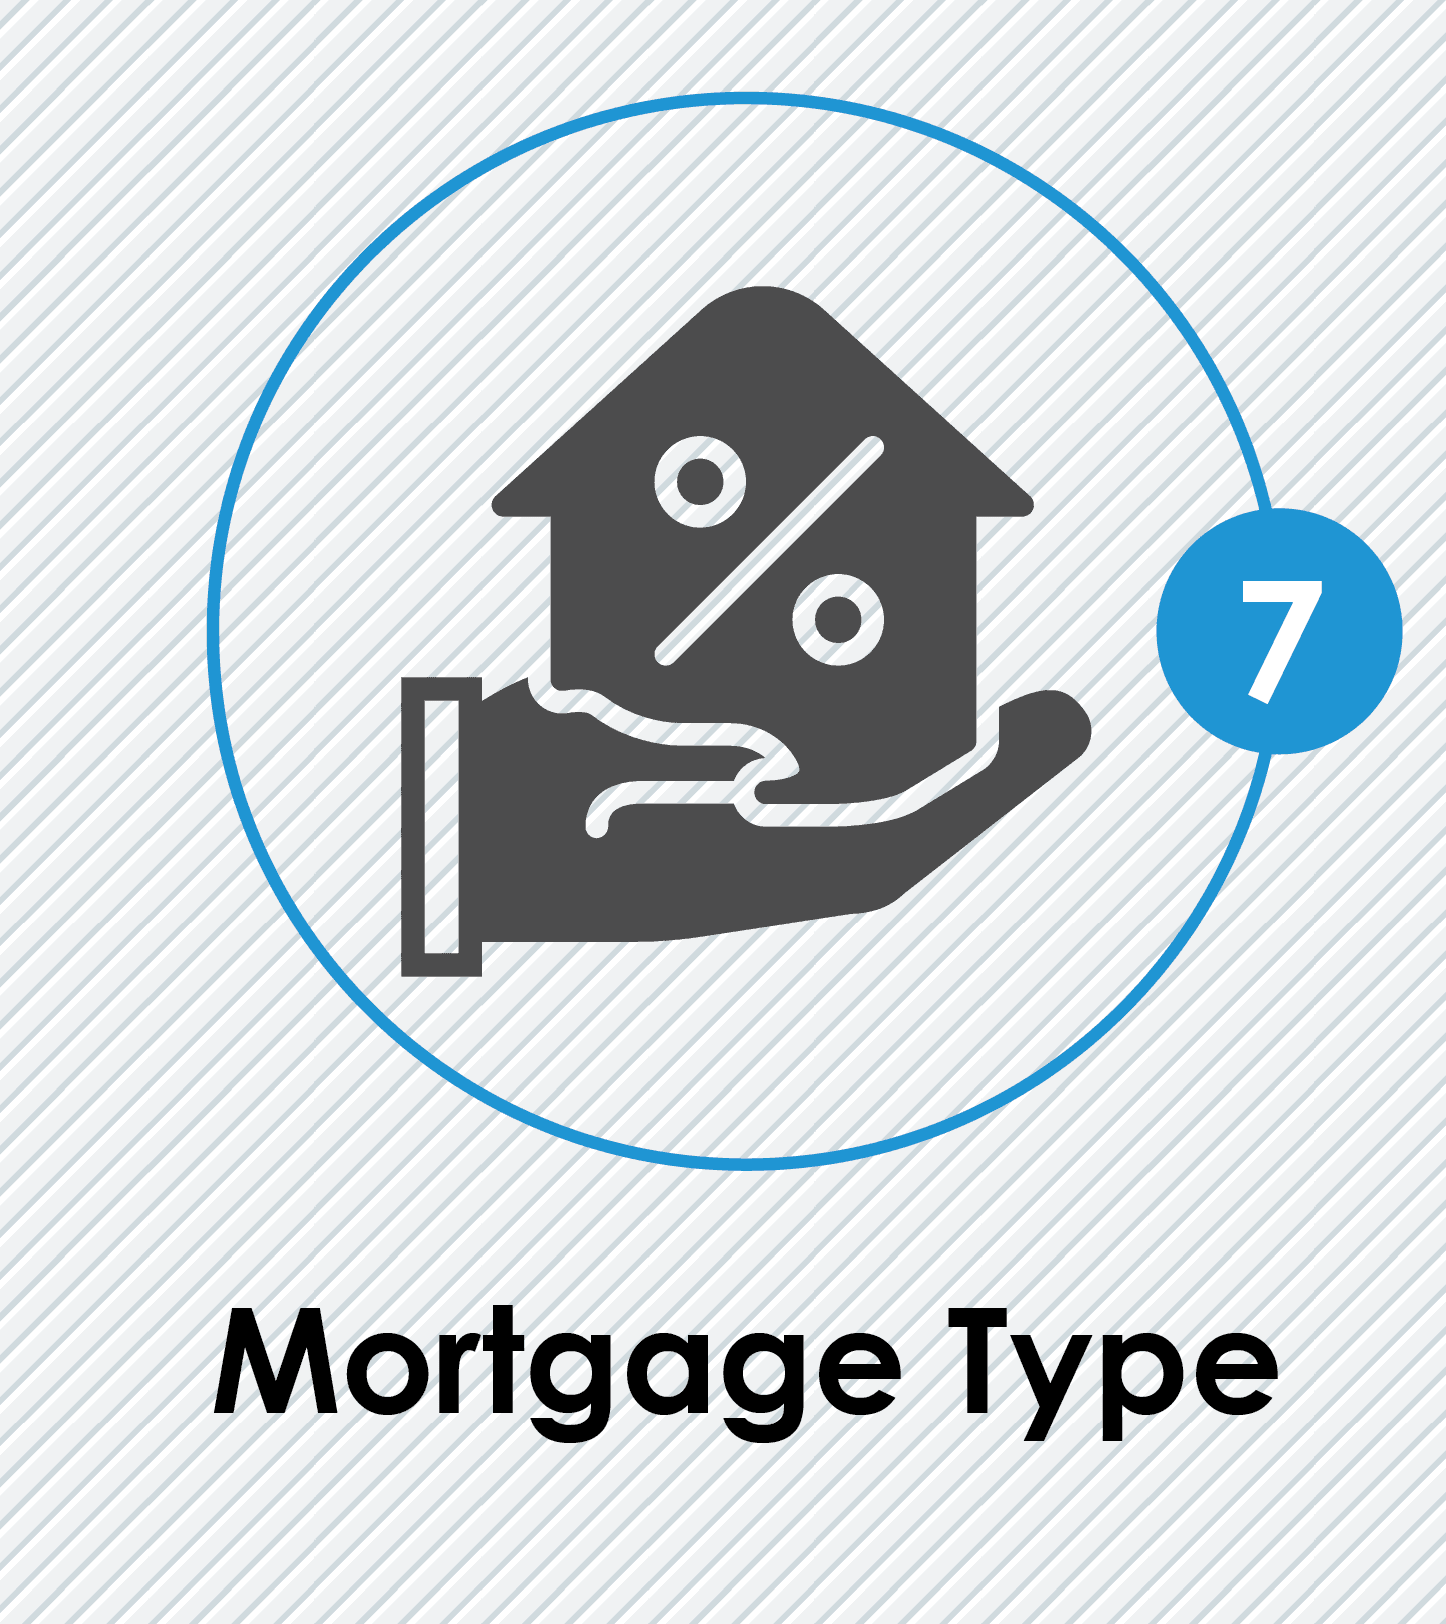 What type of mortgage will you use when buying a home in charlotte?